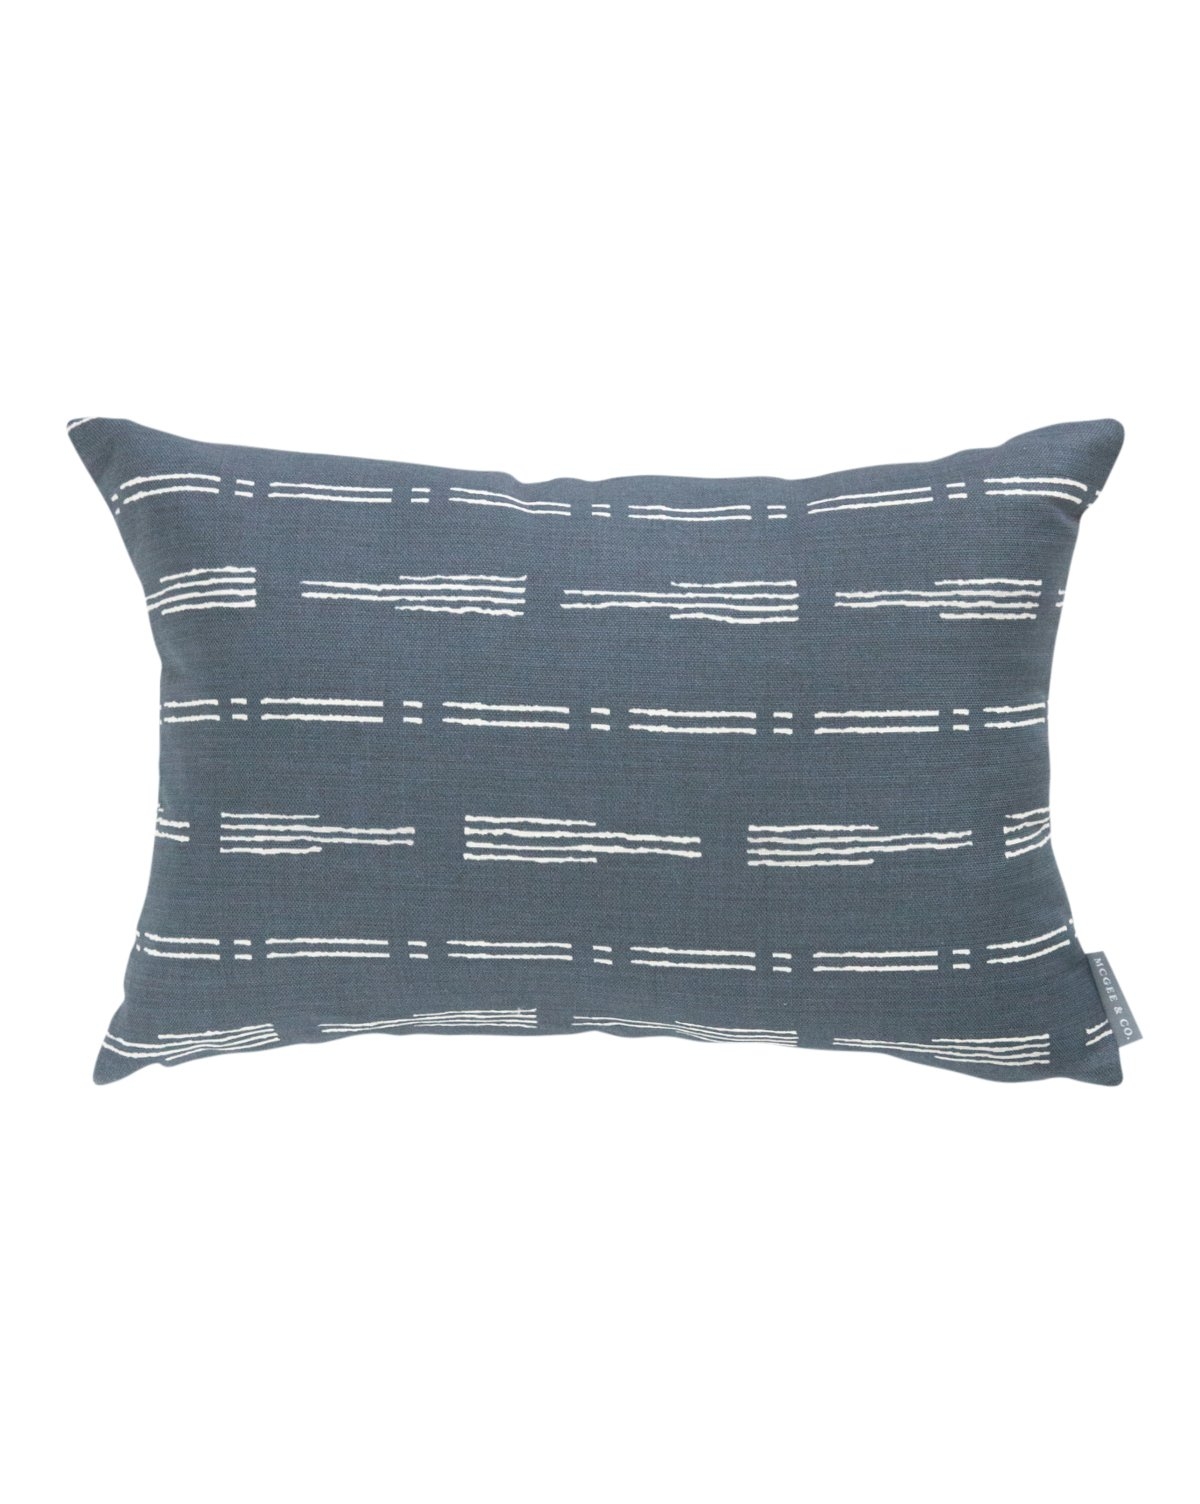 NIK BROKEN STRIPE PILLOW COVER WITHOUT INSERT, NAVY, 14" x 20" - Image 0